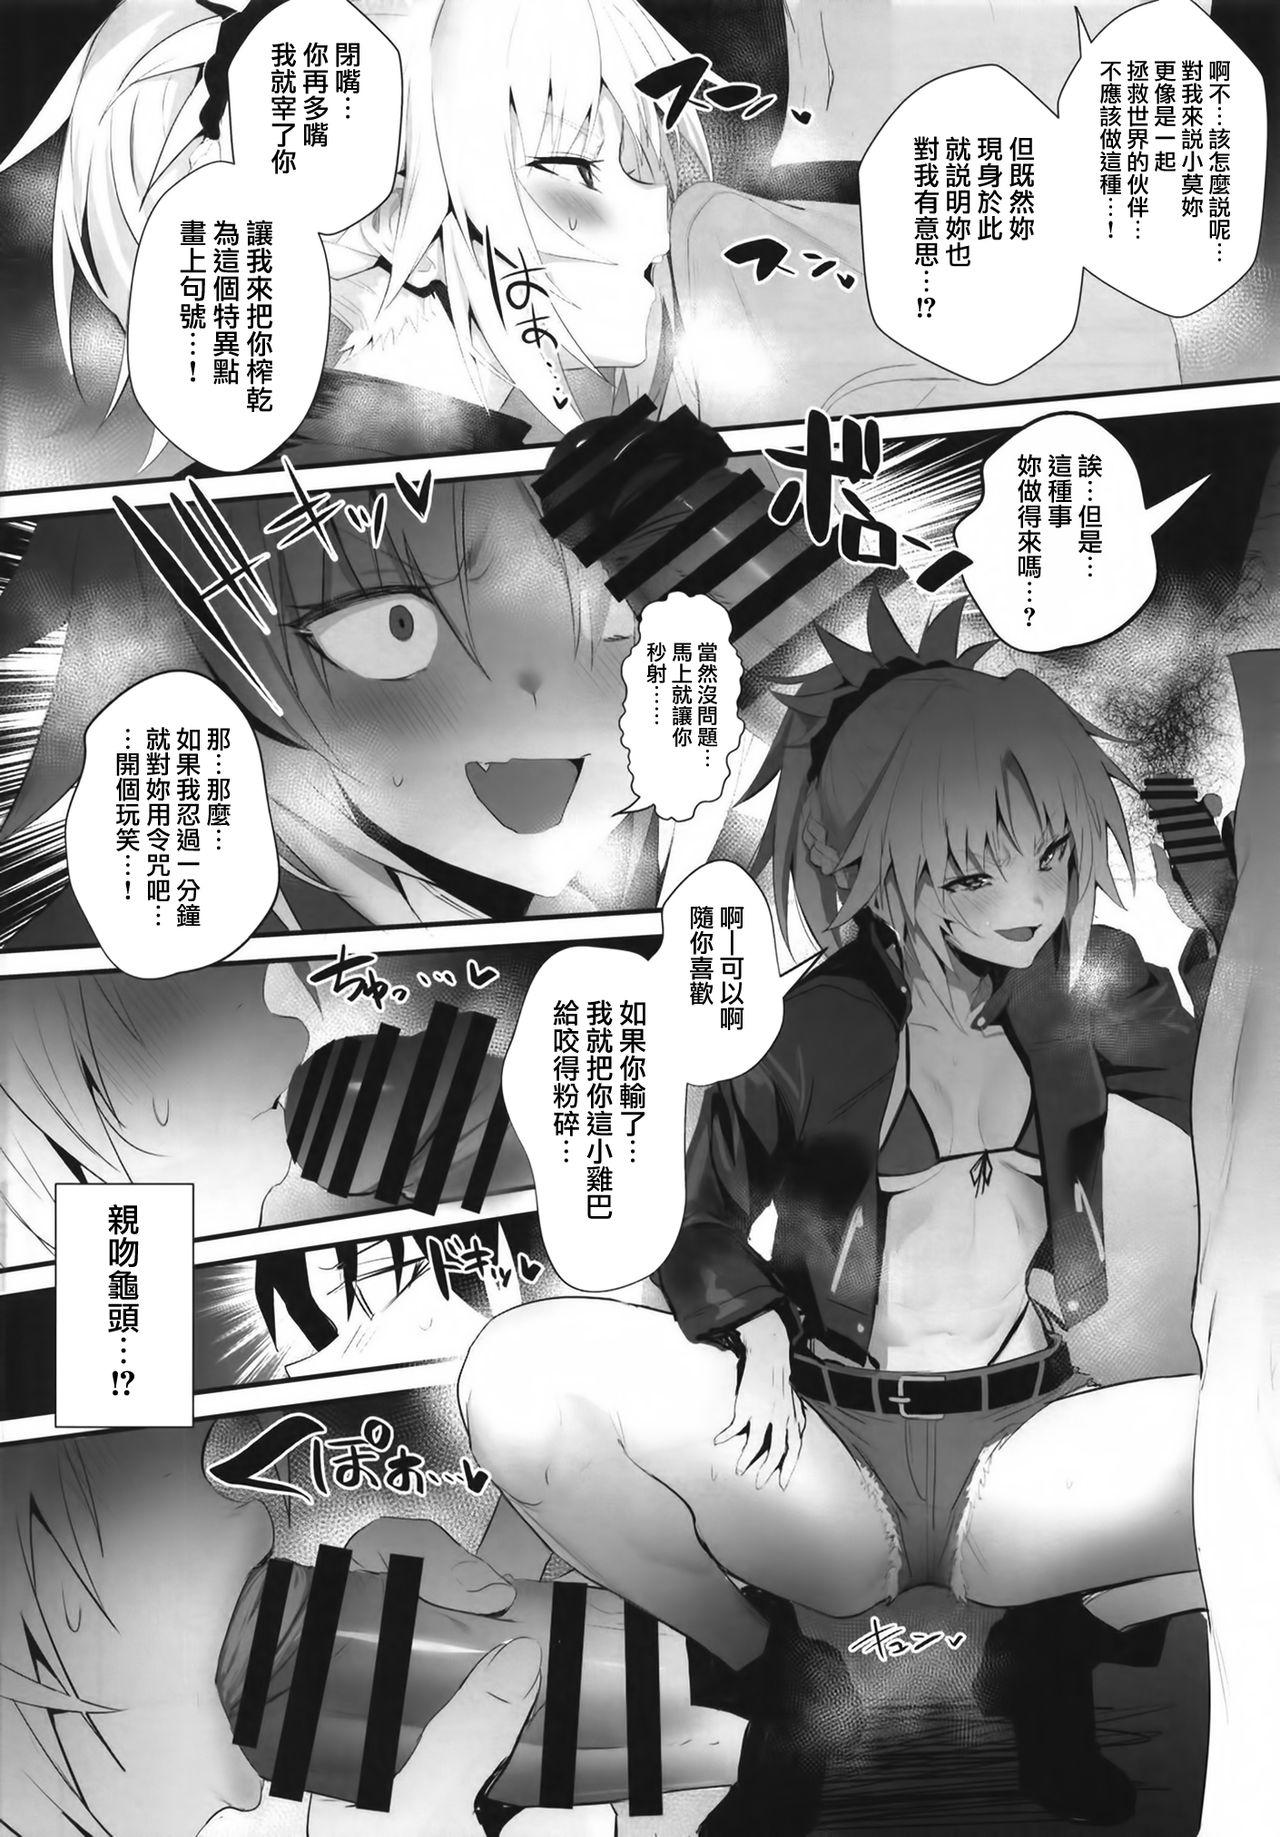 Role Play SUKEBE Order VOL. 02 - Fate grand order Hardcorend - Page 4